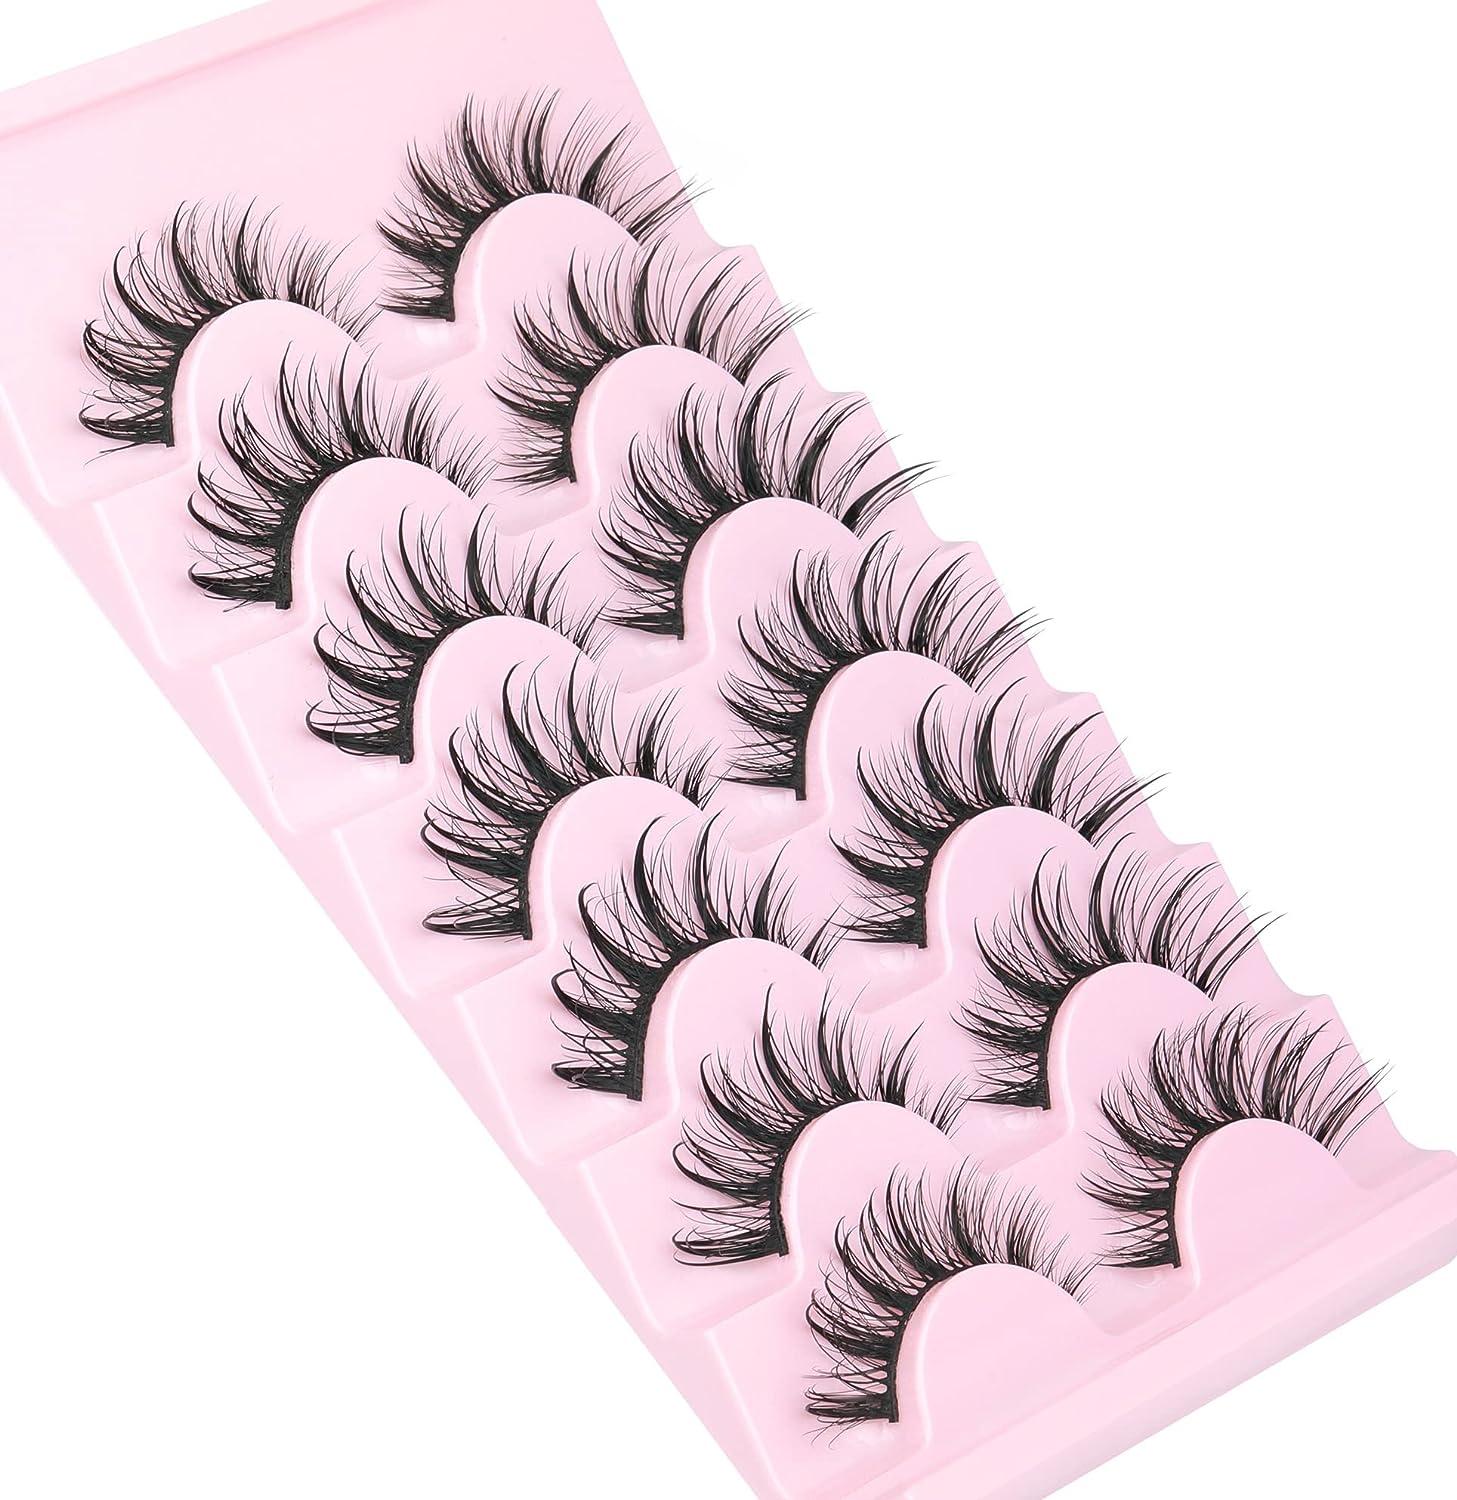 Manga Lashes Natural Wet Look False Eyelashes Manhua Anime Cosplay Korean  Makeup 3D Spiky Thick Lashes That Look Like Individual Clusters by Geeneiya